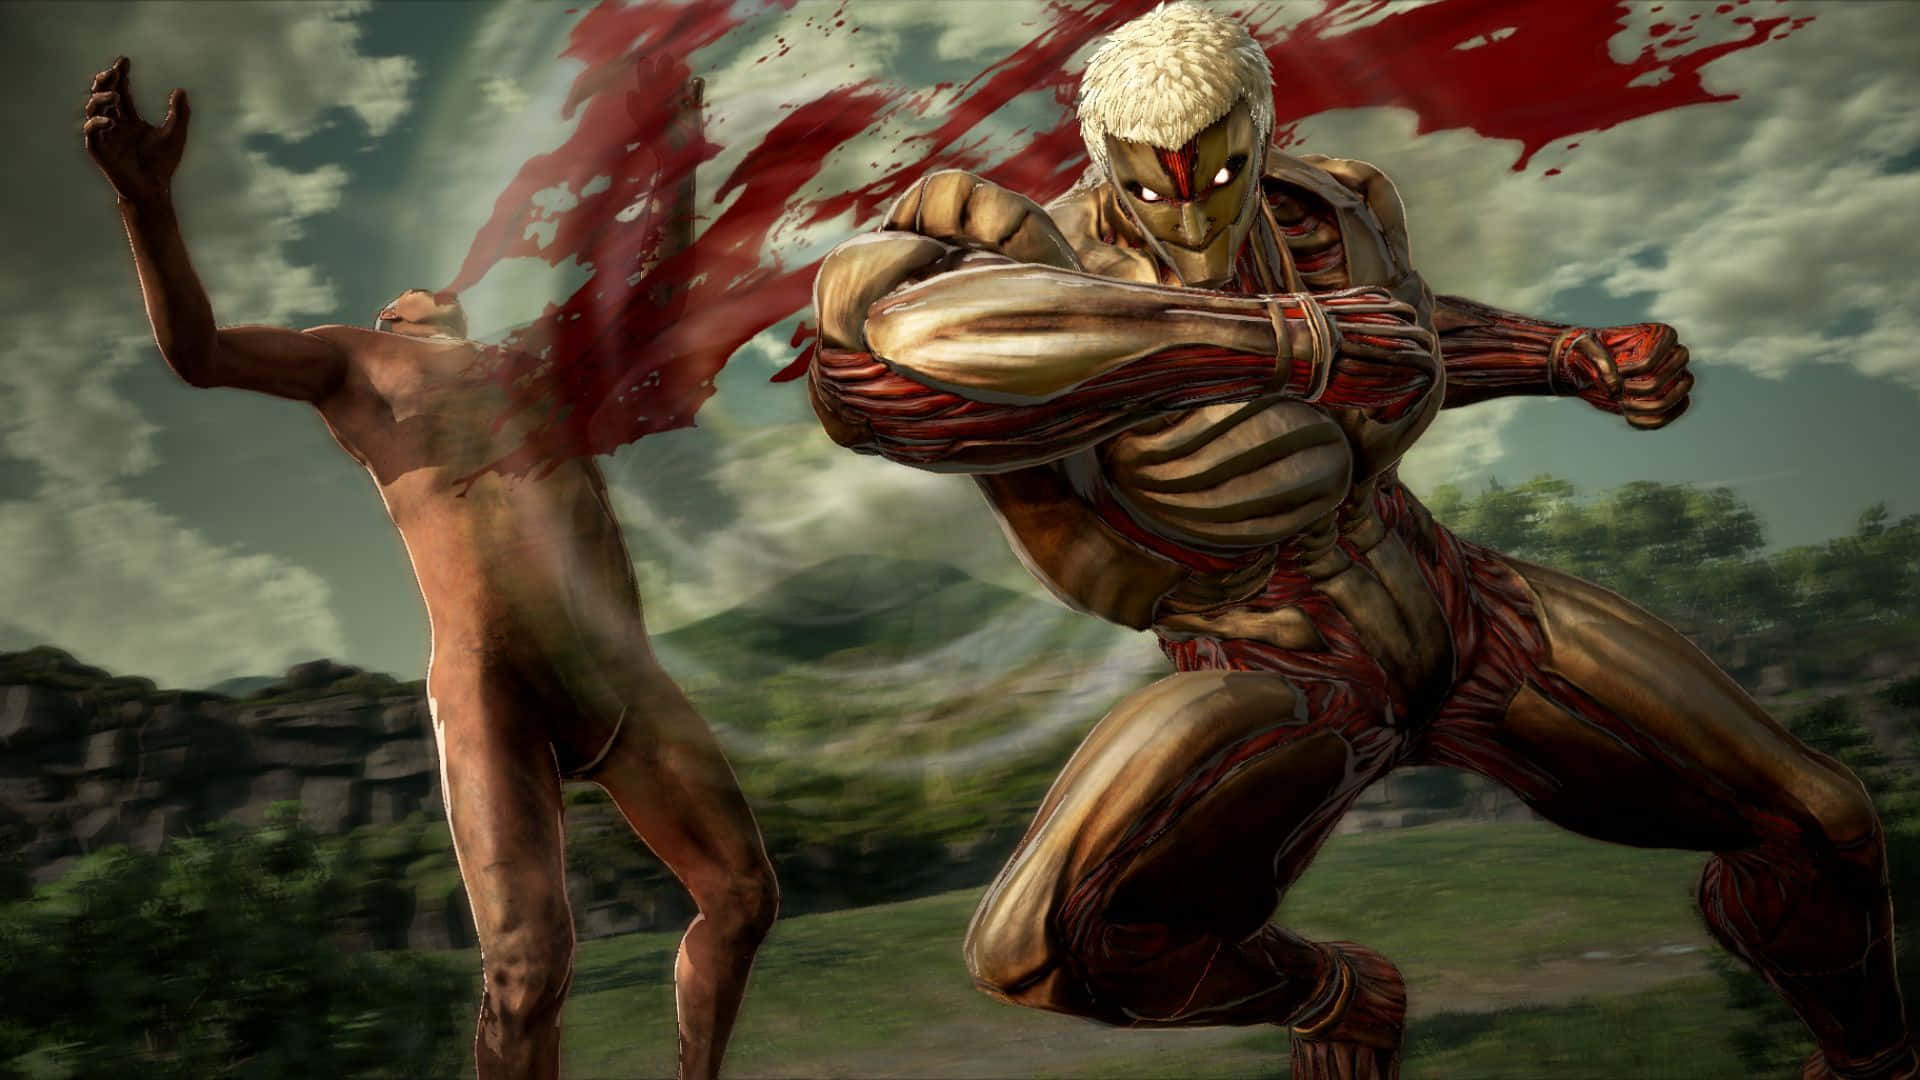 The Armored Titan Emerges in a Blur of Action Wallpaper